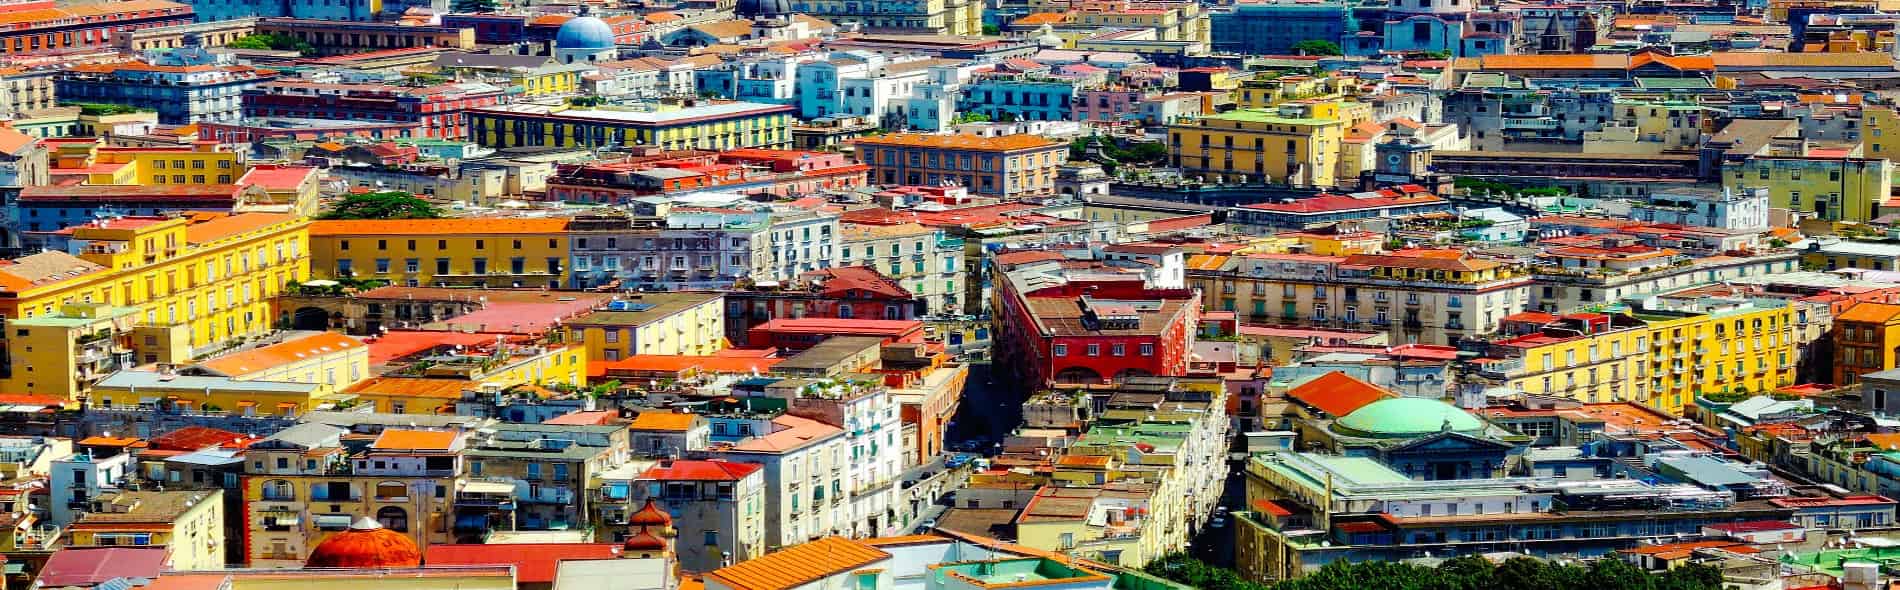 Walking Guided Tour of Naples